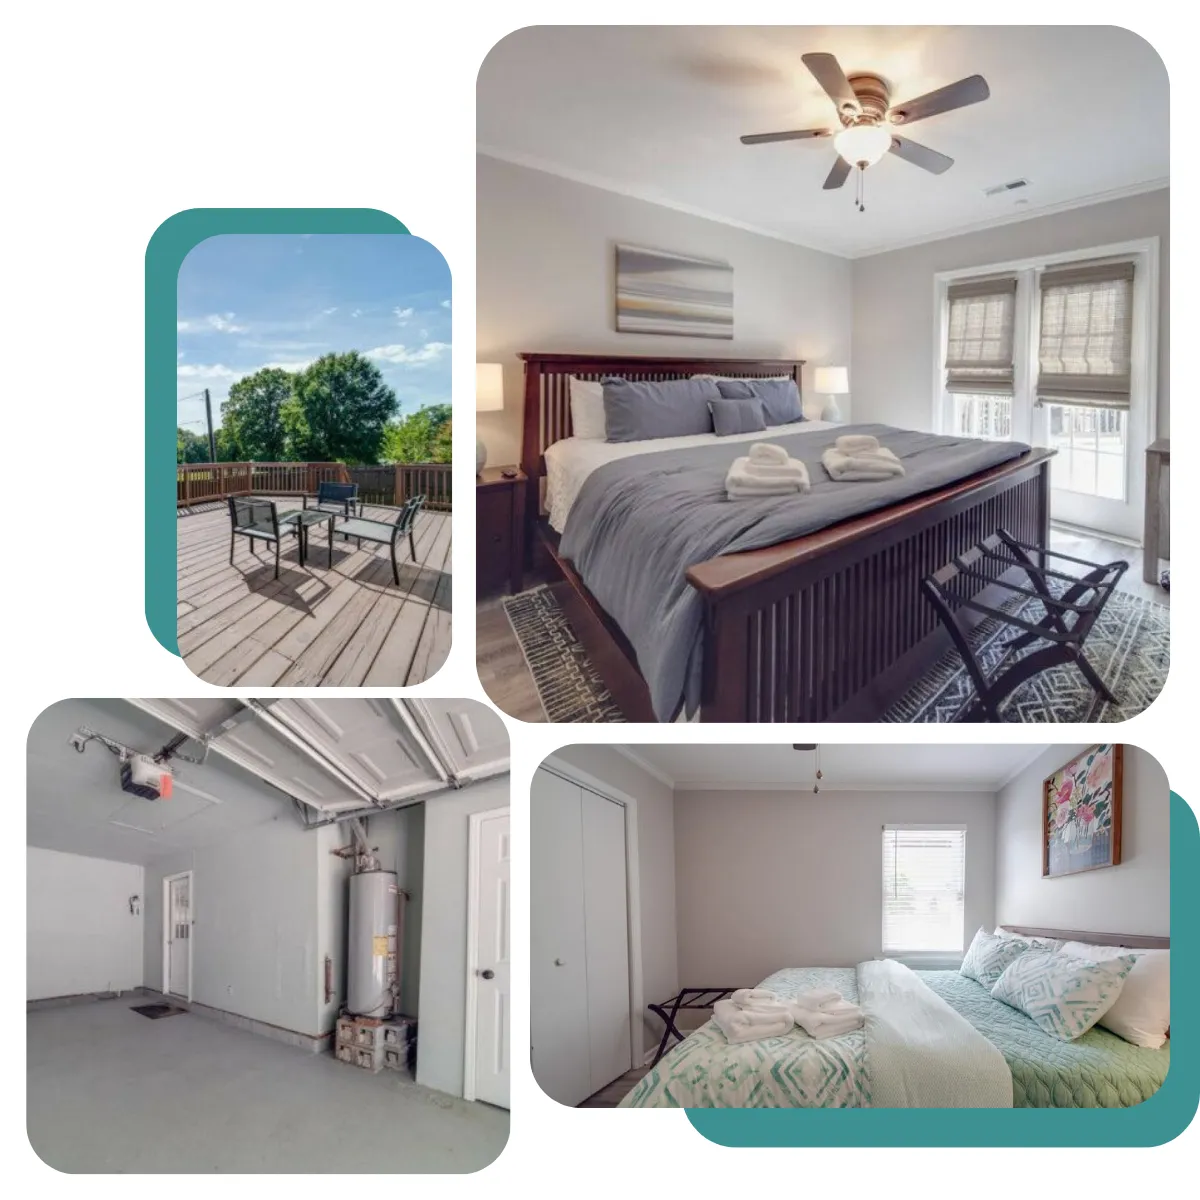 Stay at Biddleville Home: 3 bedrooms with 3 beds for 6 guests. Entire place and yard yours. Near Uptown Charlotte, with parks, breweries, and eateries nearby. Walk to light rail in 10 mins, buses, Uber, and Lyft available.